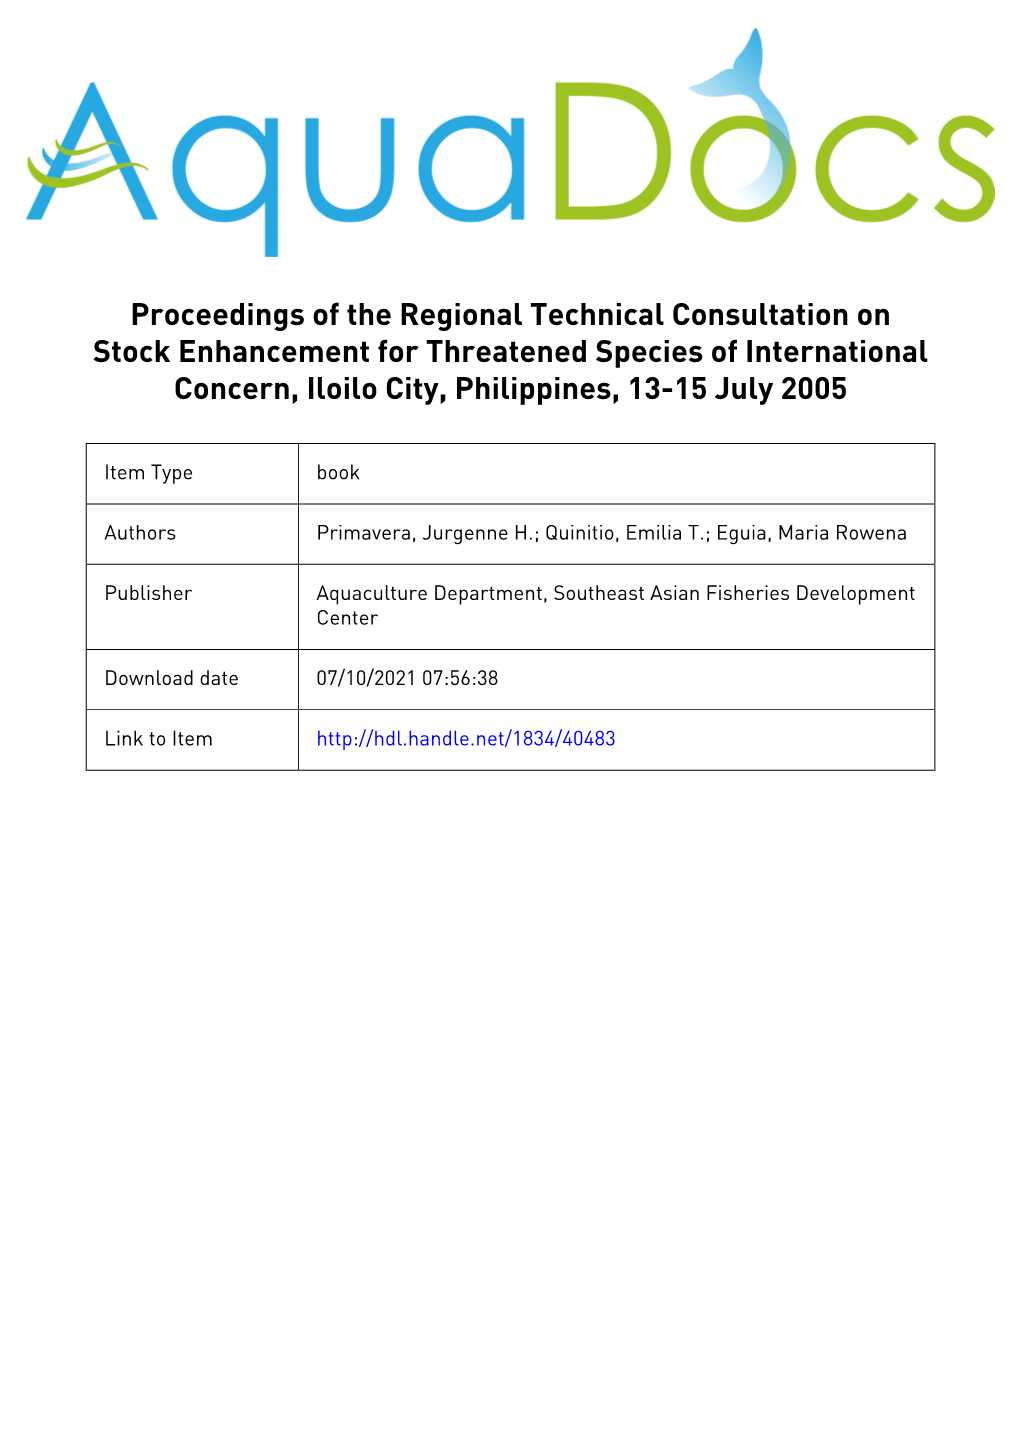 Proceedings of the Regional Technical Consultation on Stock Enhancement for Threatened Species of International Concern, Iloilo City, Philippines, 13-15 July 2005